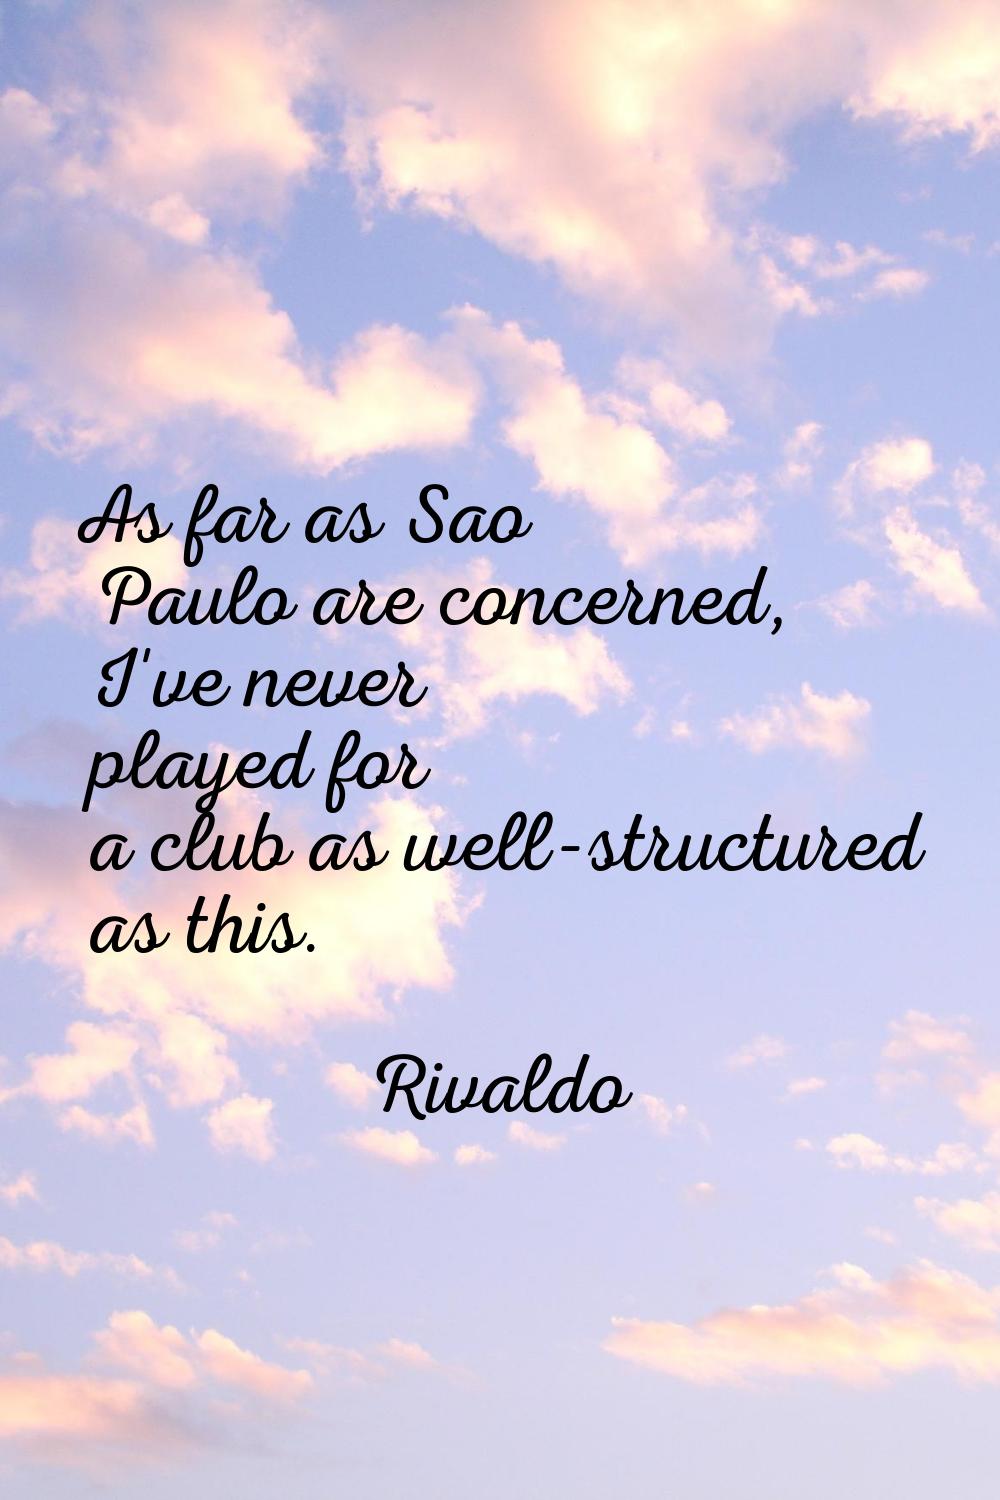 As far as Sao Paulo are concerned, I've never played for a club as well-structured as this.